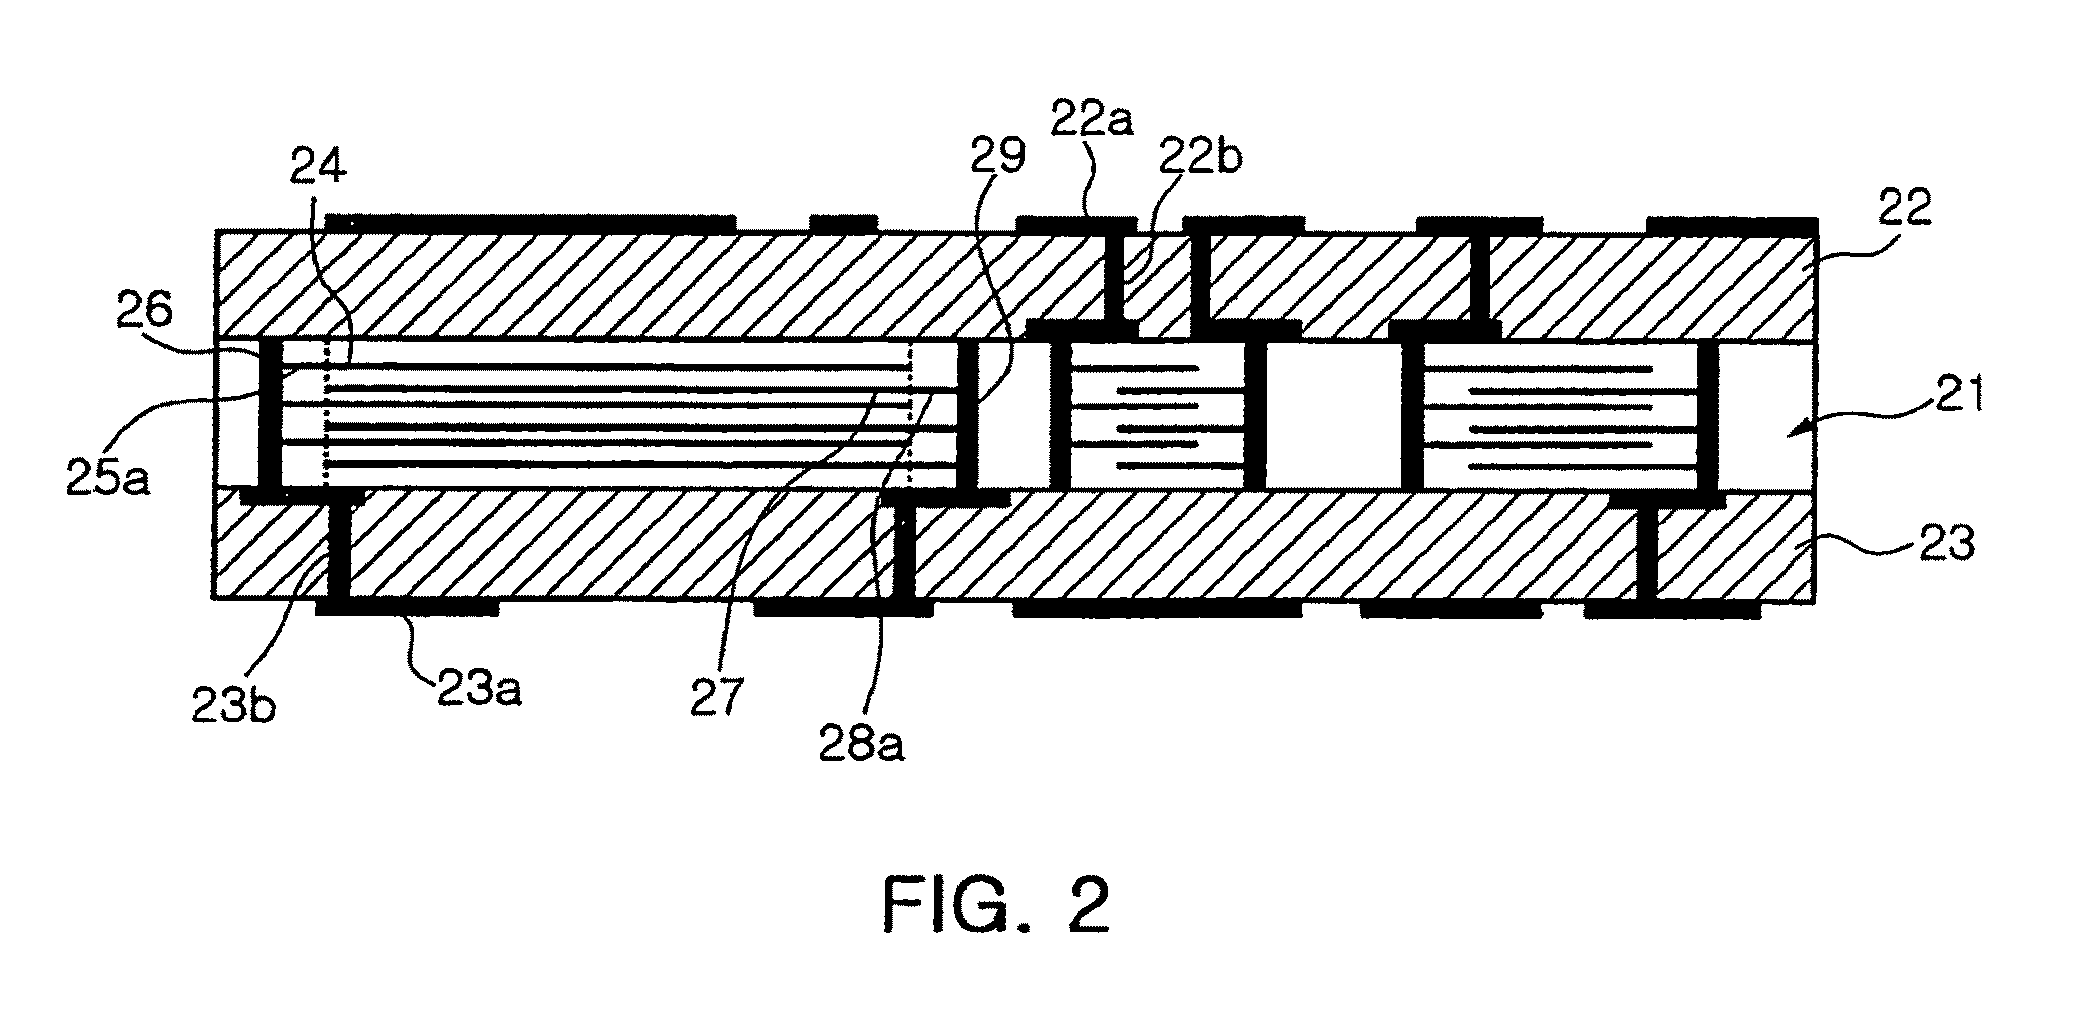 Capacitor embedded printed circuit board